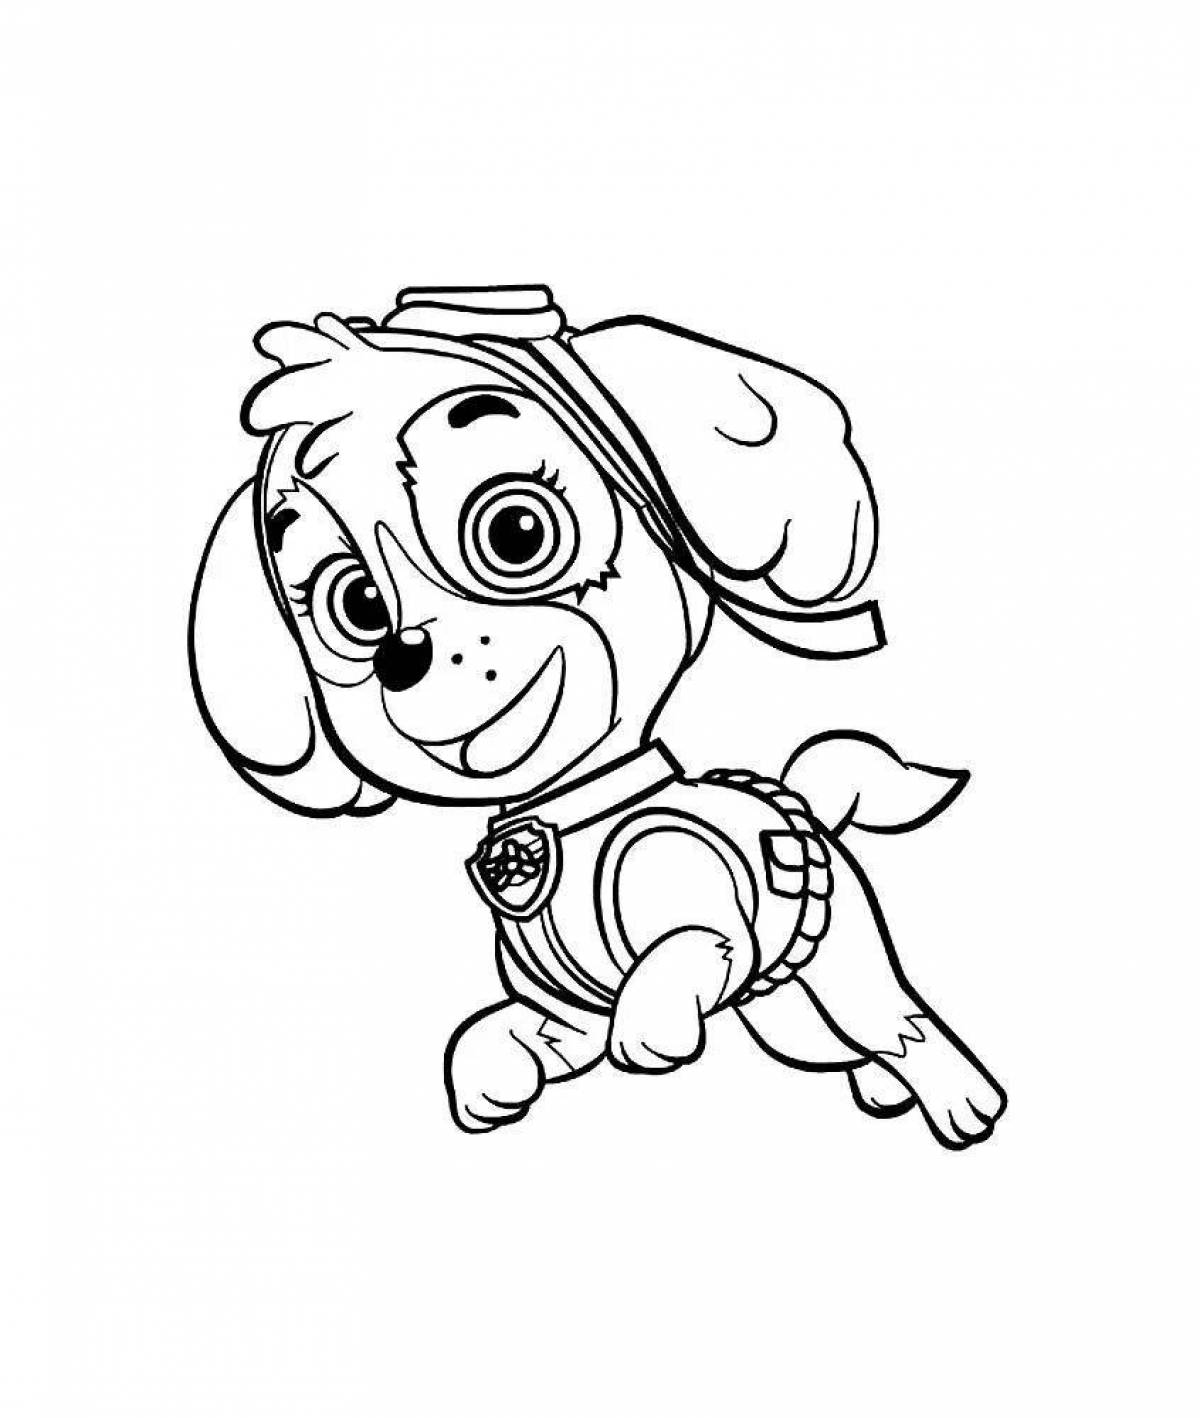 Skye Puppy Coloring Page